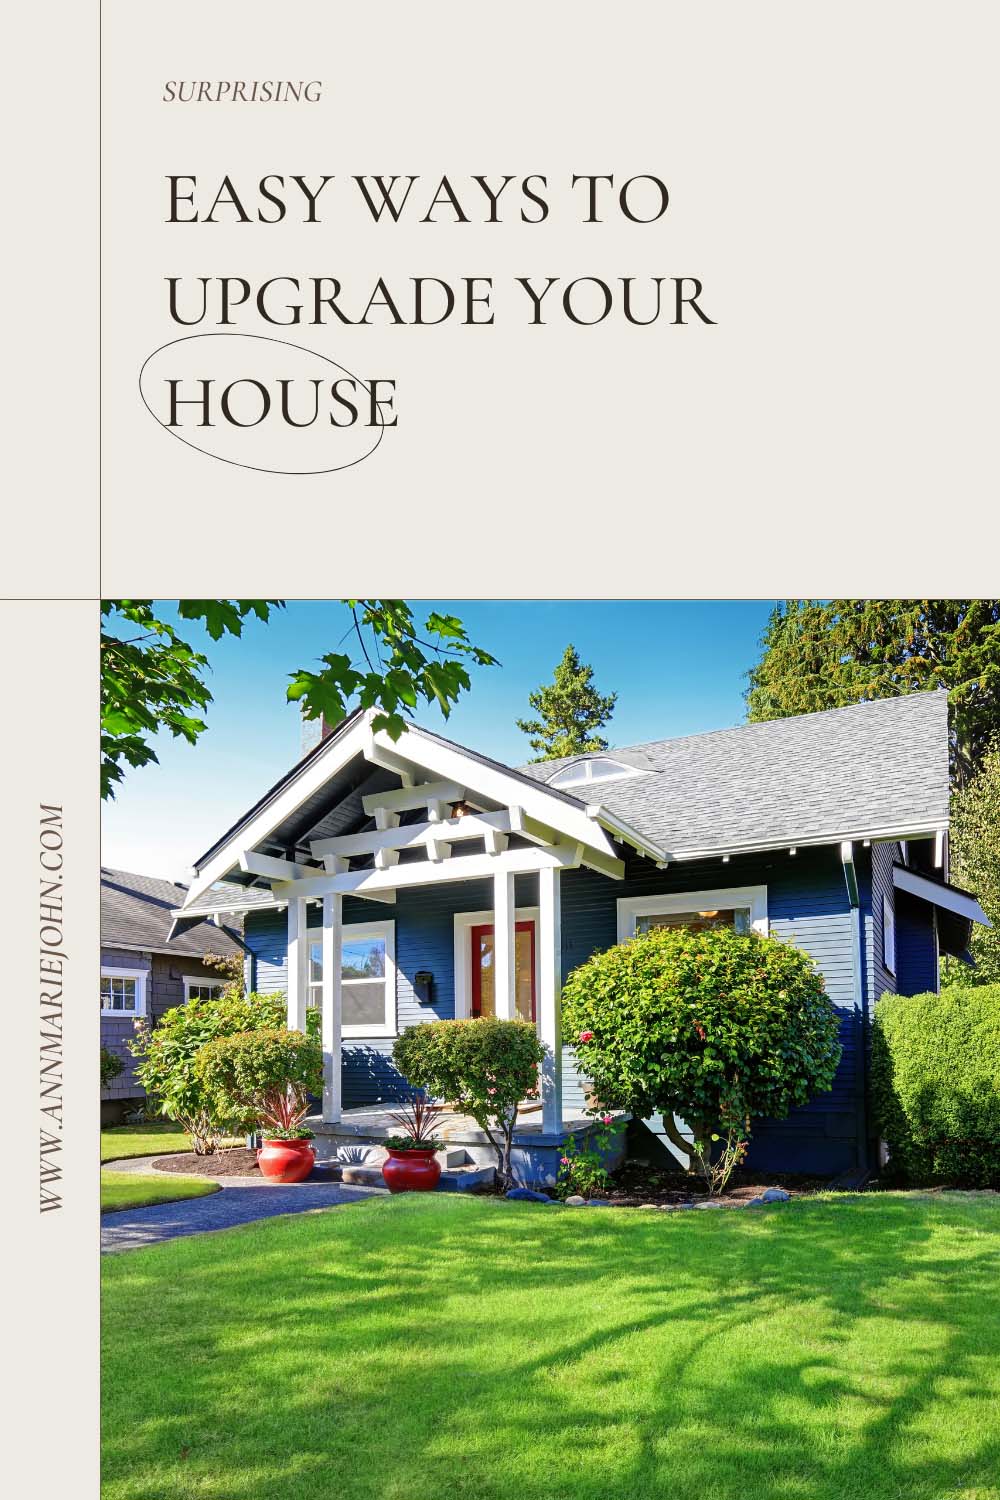 Easy Ways to Upgrade Your House